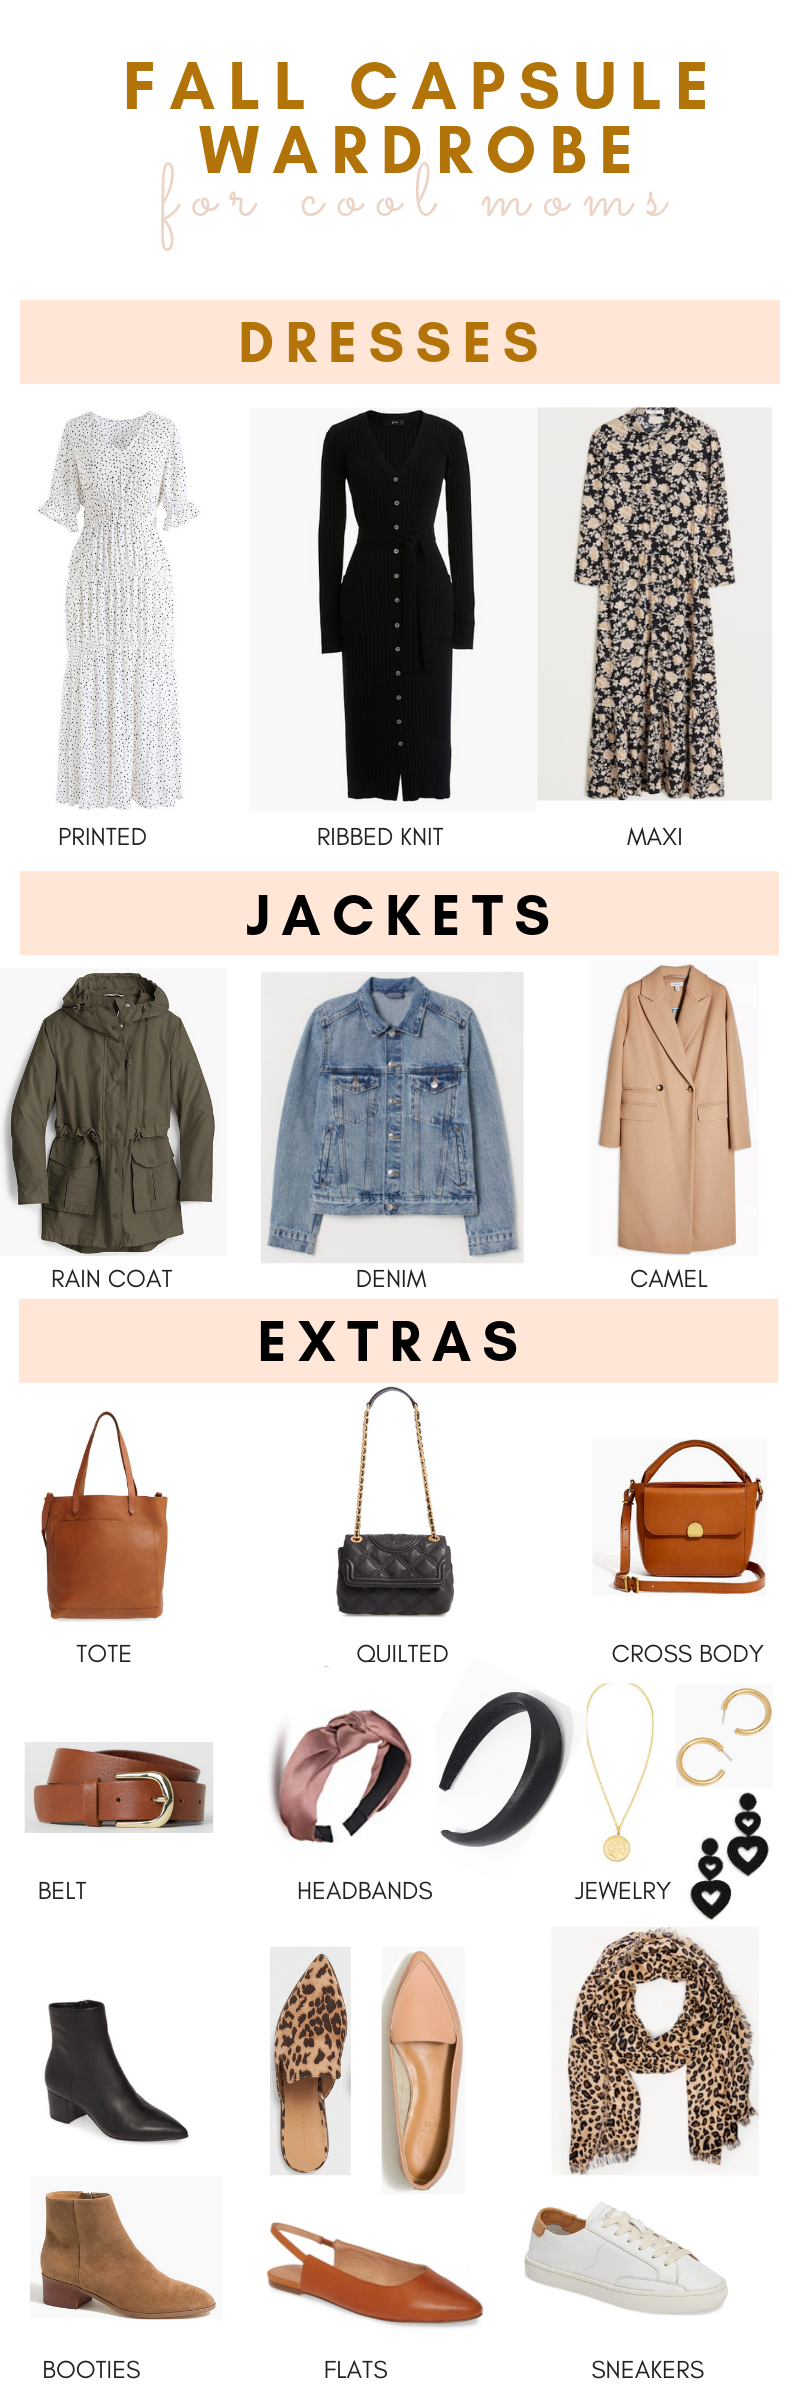 2019 Fall Capsule Wardrobe For Cool MOMS! - The Mama Notes